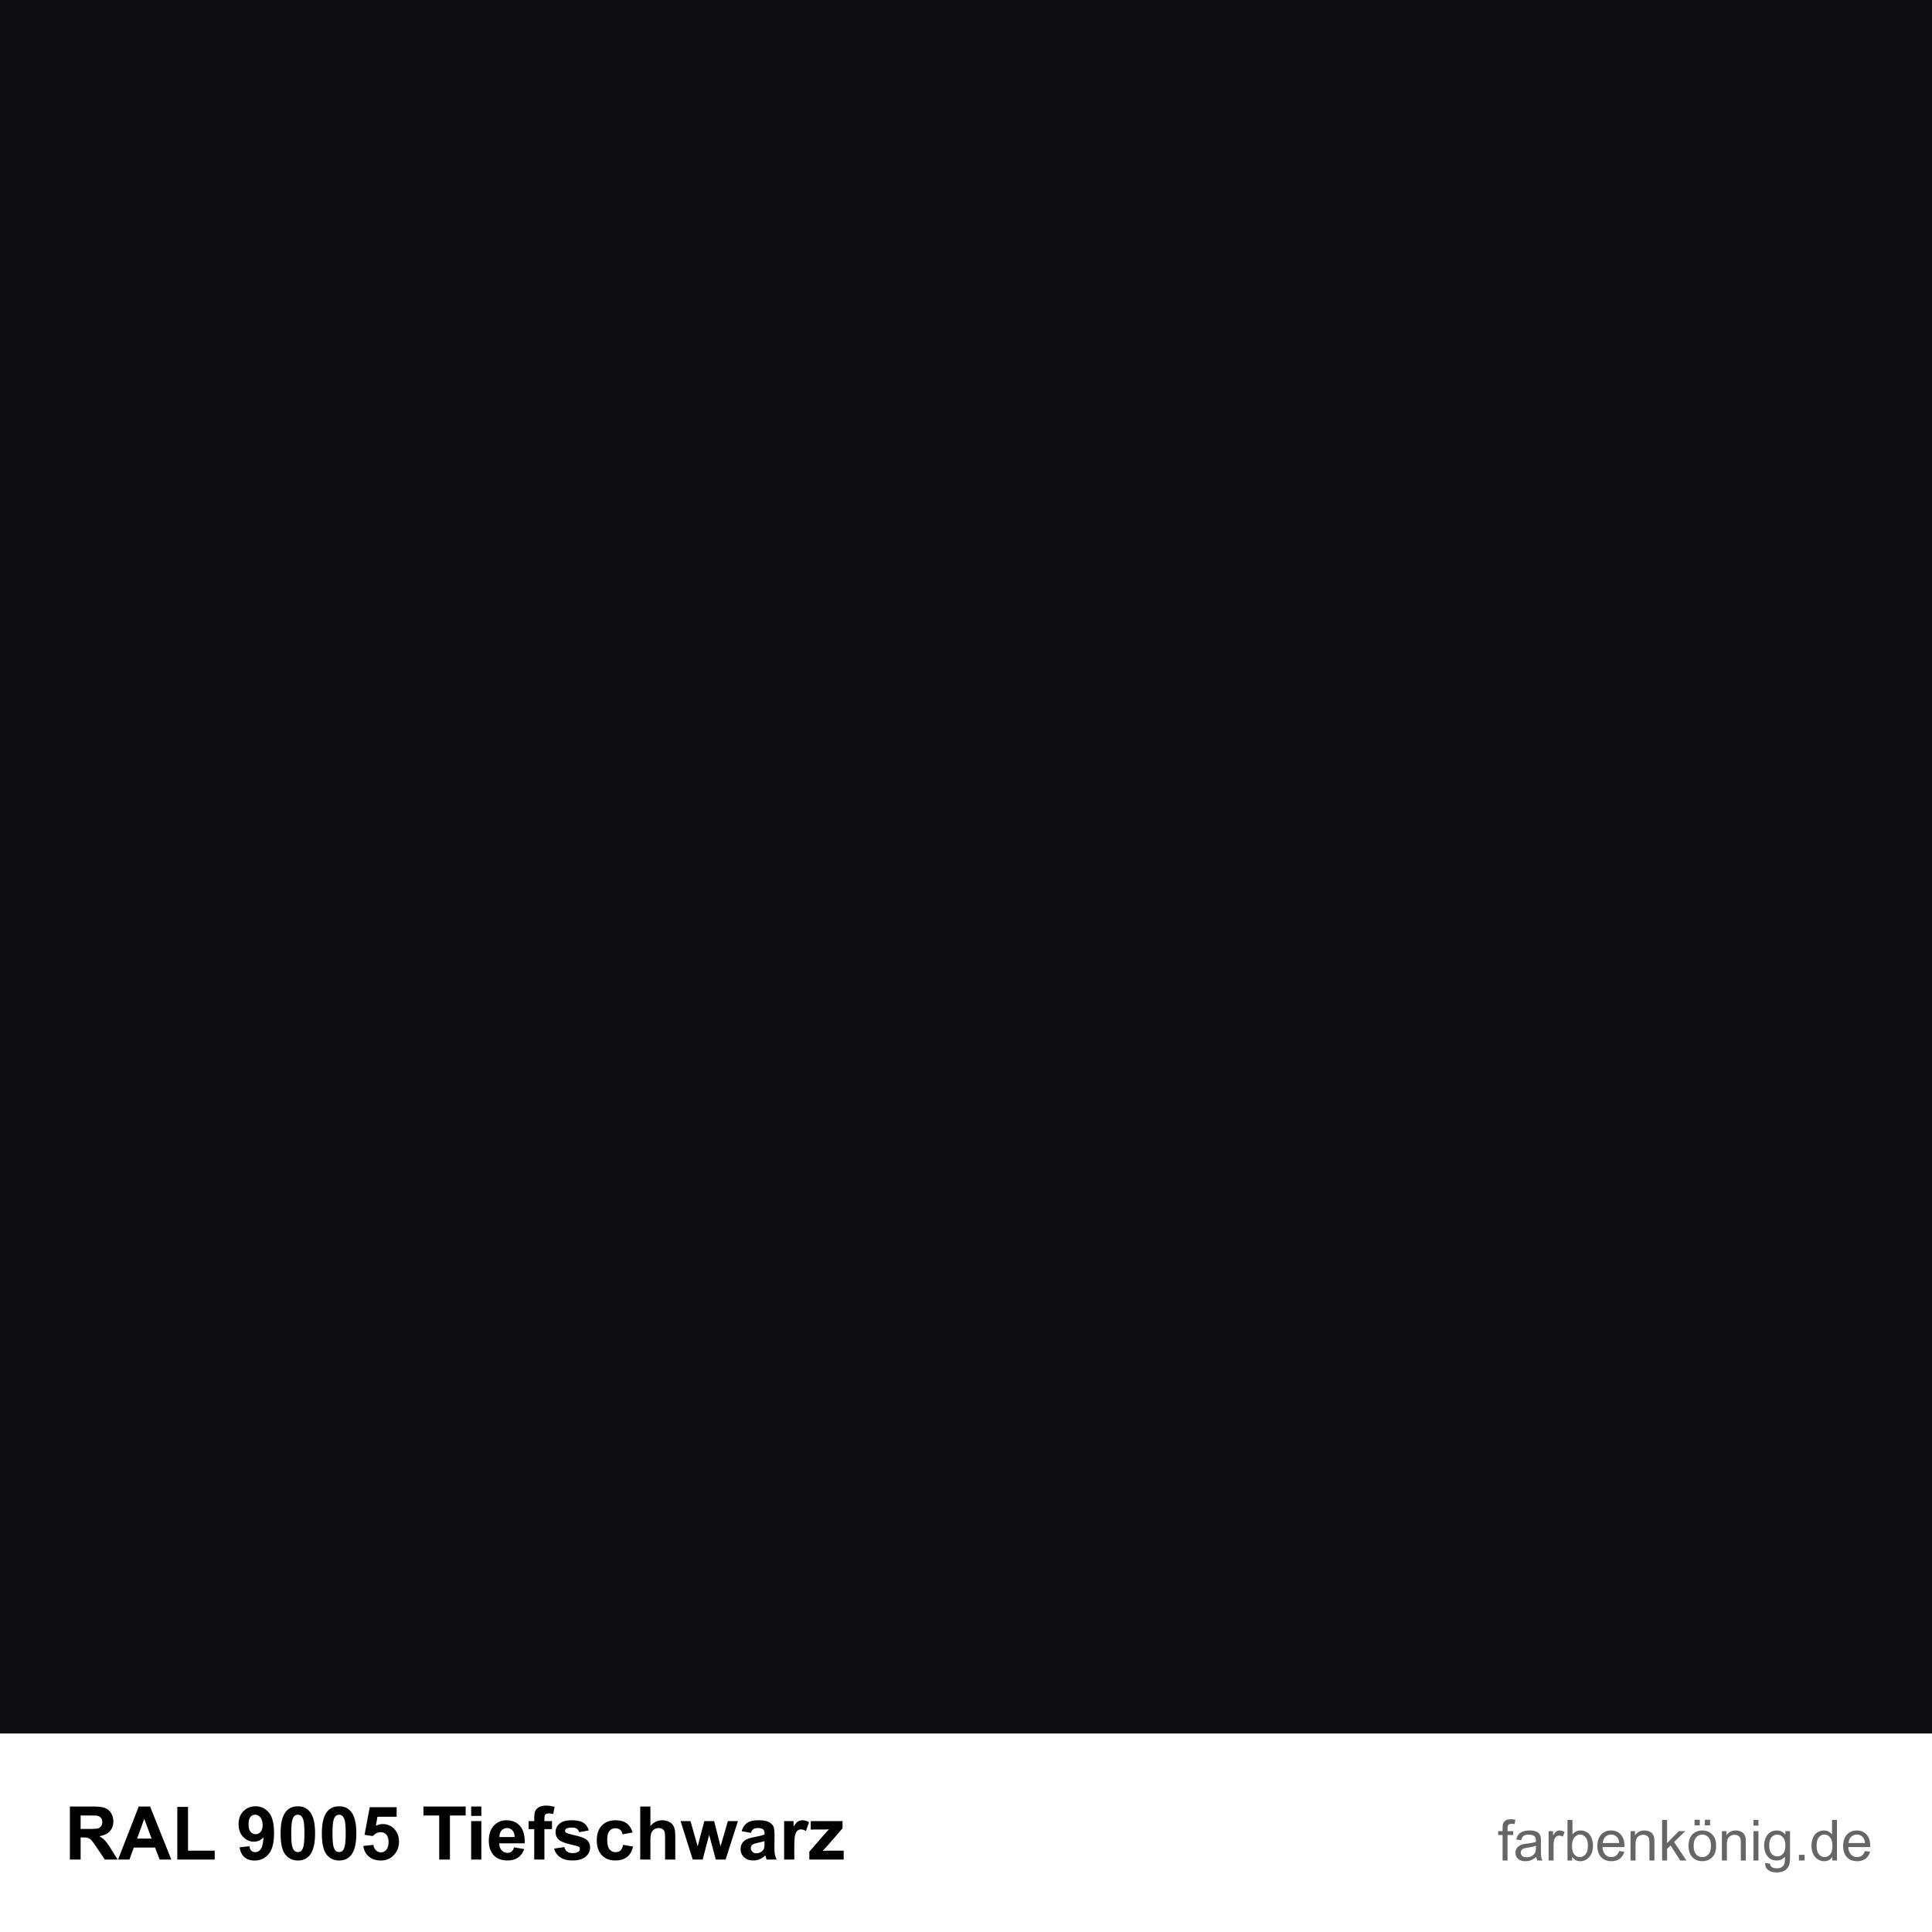 RAL9005